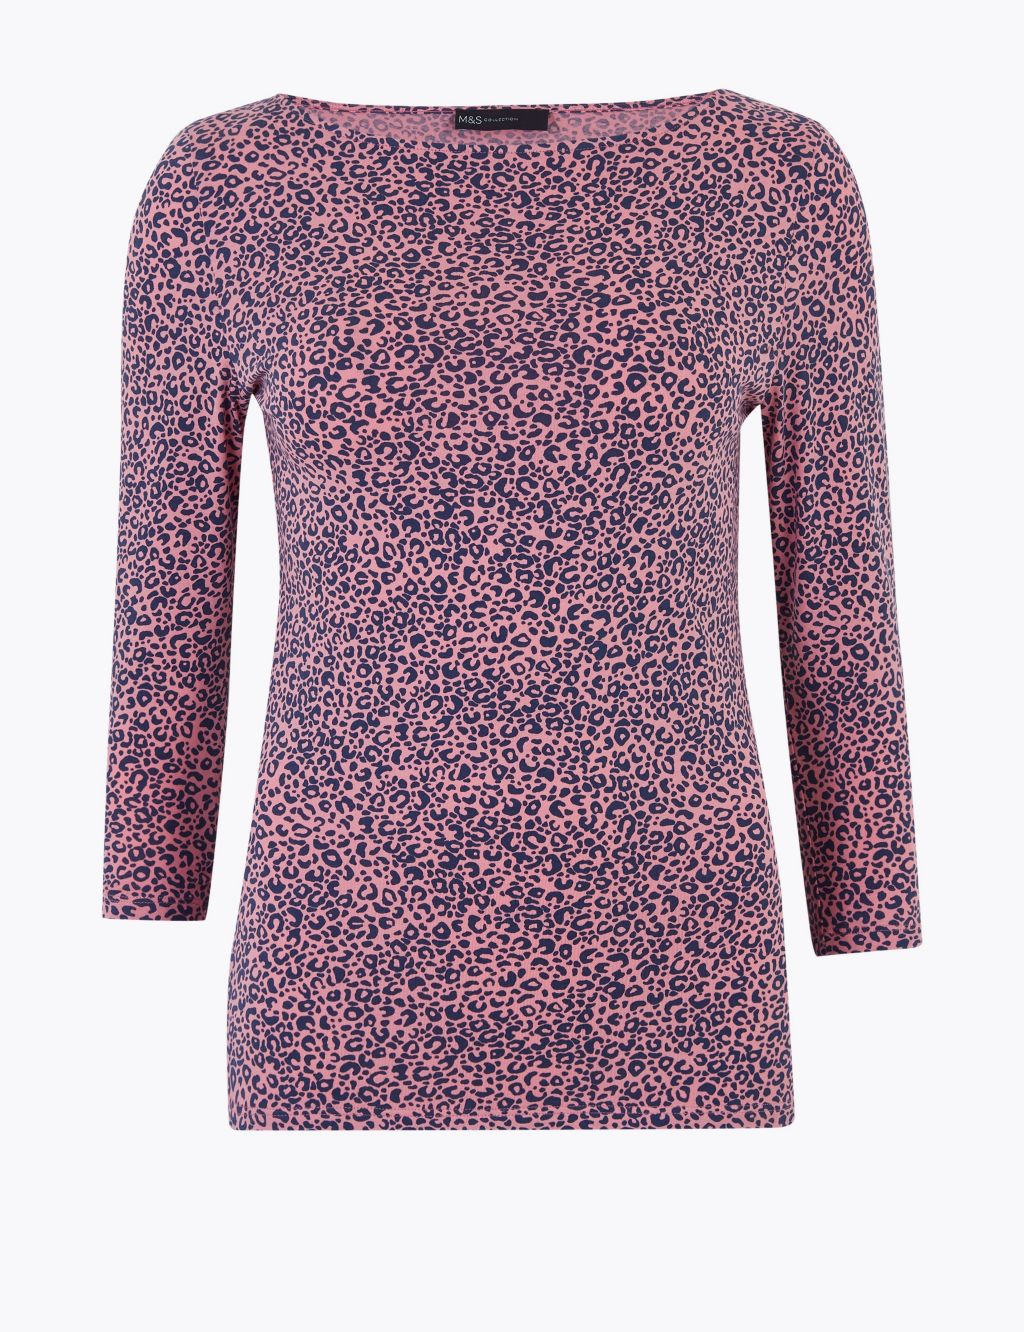 Cotton Animal Print Fitted T-Shirt | M&S Collection | M&S